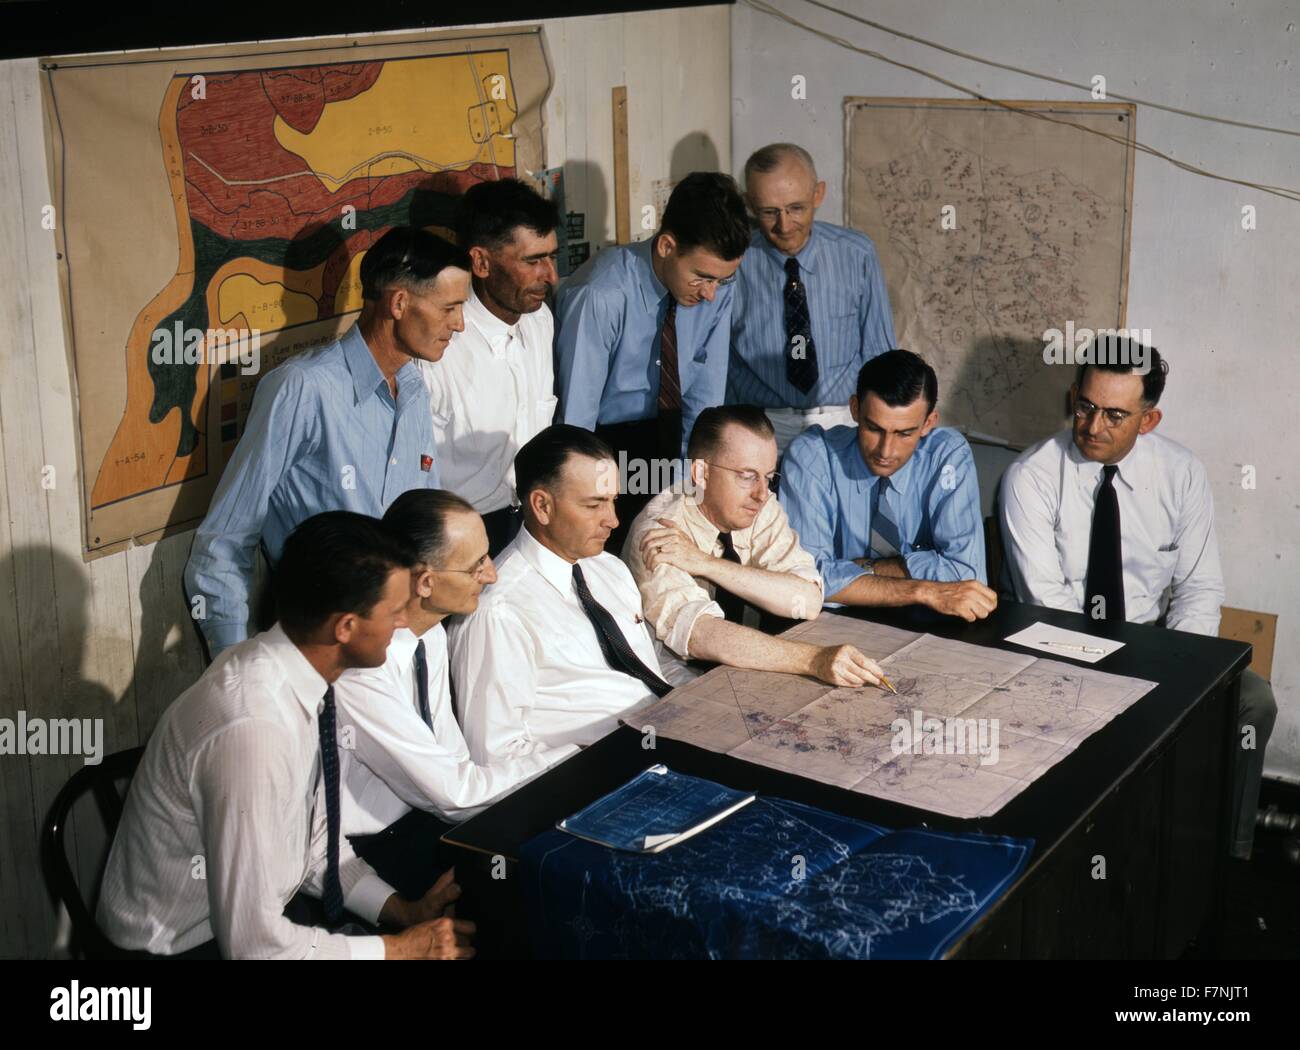 a military briefing in teh USA during World War Two 1942, with man pointing to a wall map. photographer Marion Post Wolcott 1910-1990 Stock Photo